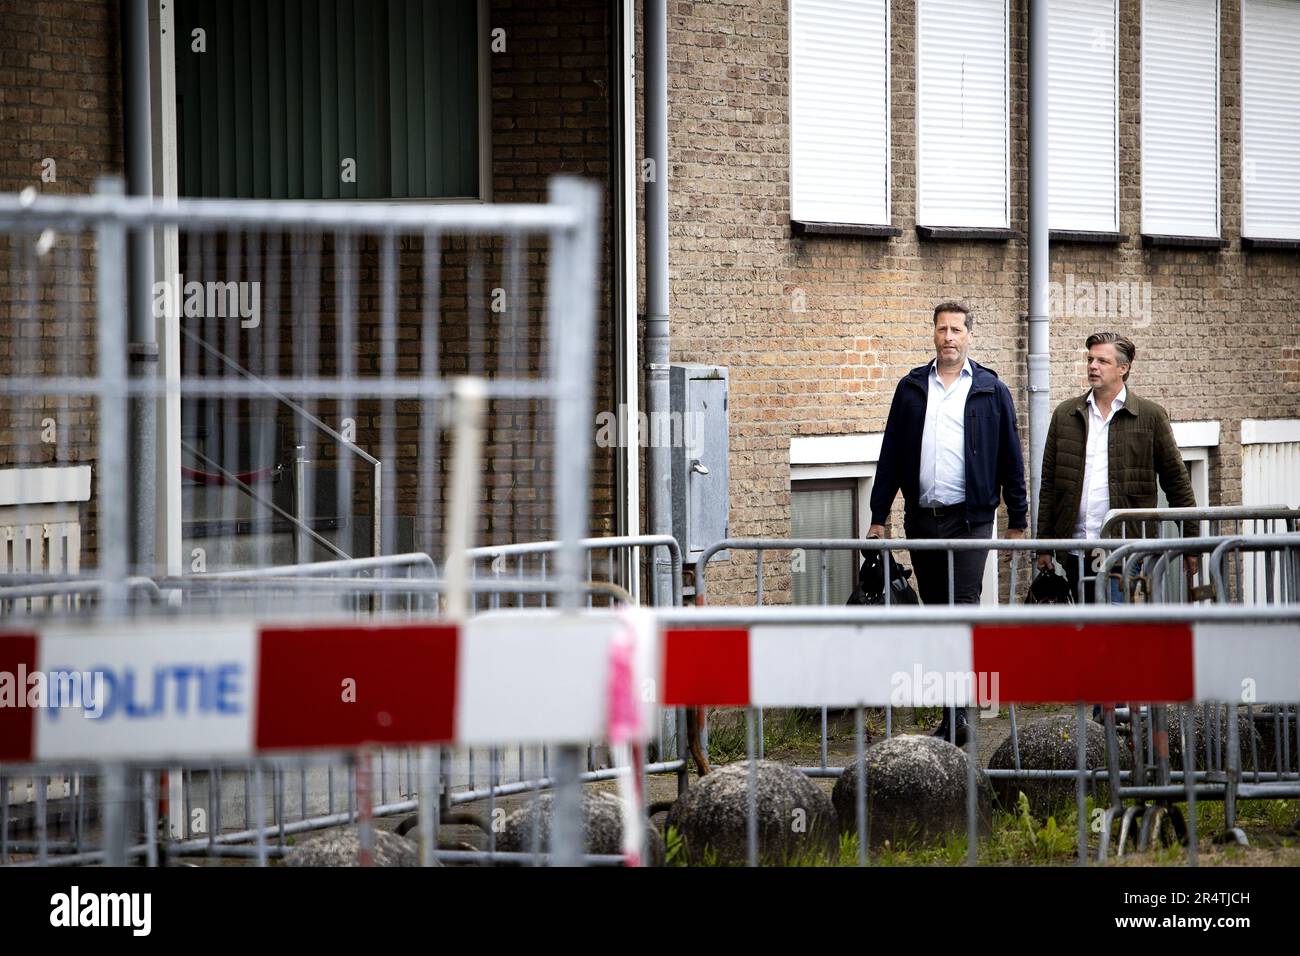 AMSTERDAM - Lawyers Mark Dunsbergen (l) and Robert van t Land (r) arrive at the court for the continuation of the extensive Marengo liquidation process, for the plea in the case of Said R. Against their client and also the alleged right-hand man of main suspect Ridouan Taghi has been sentenced to life imprisonment. ANP RAMON VAN FLYMEN netherlands out - belgium out Stock Photo